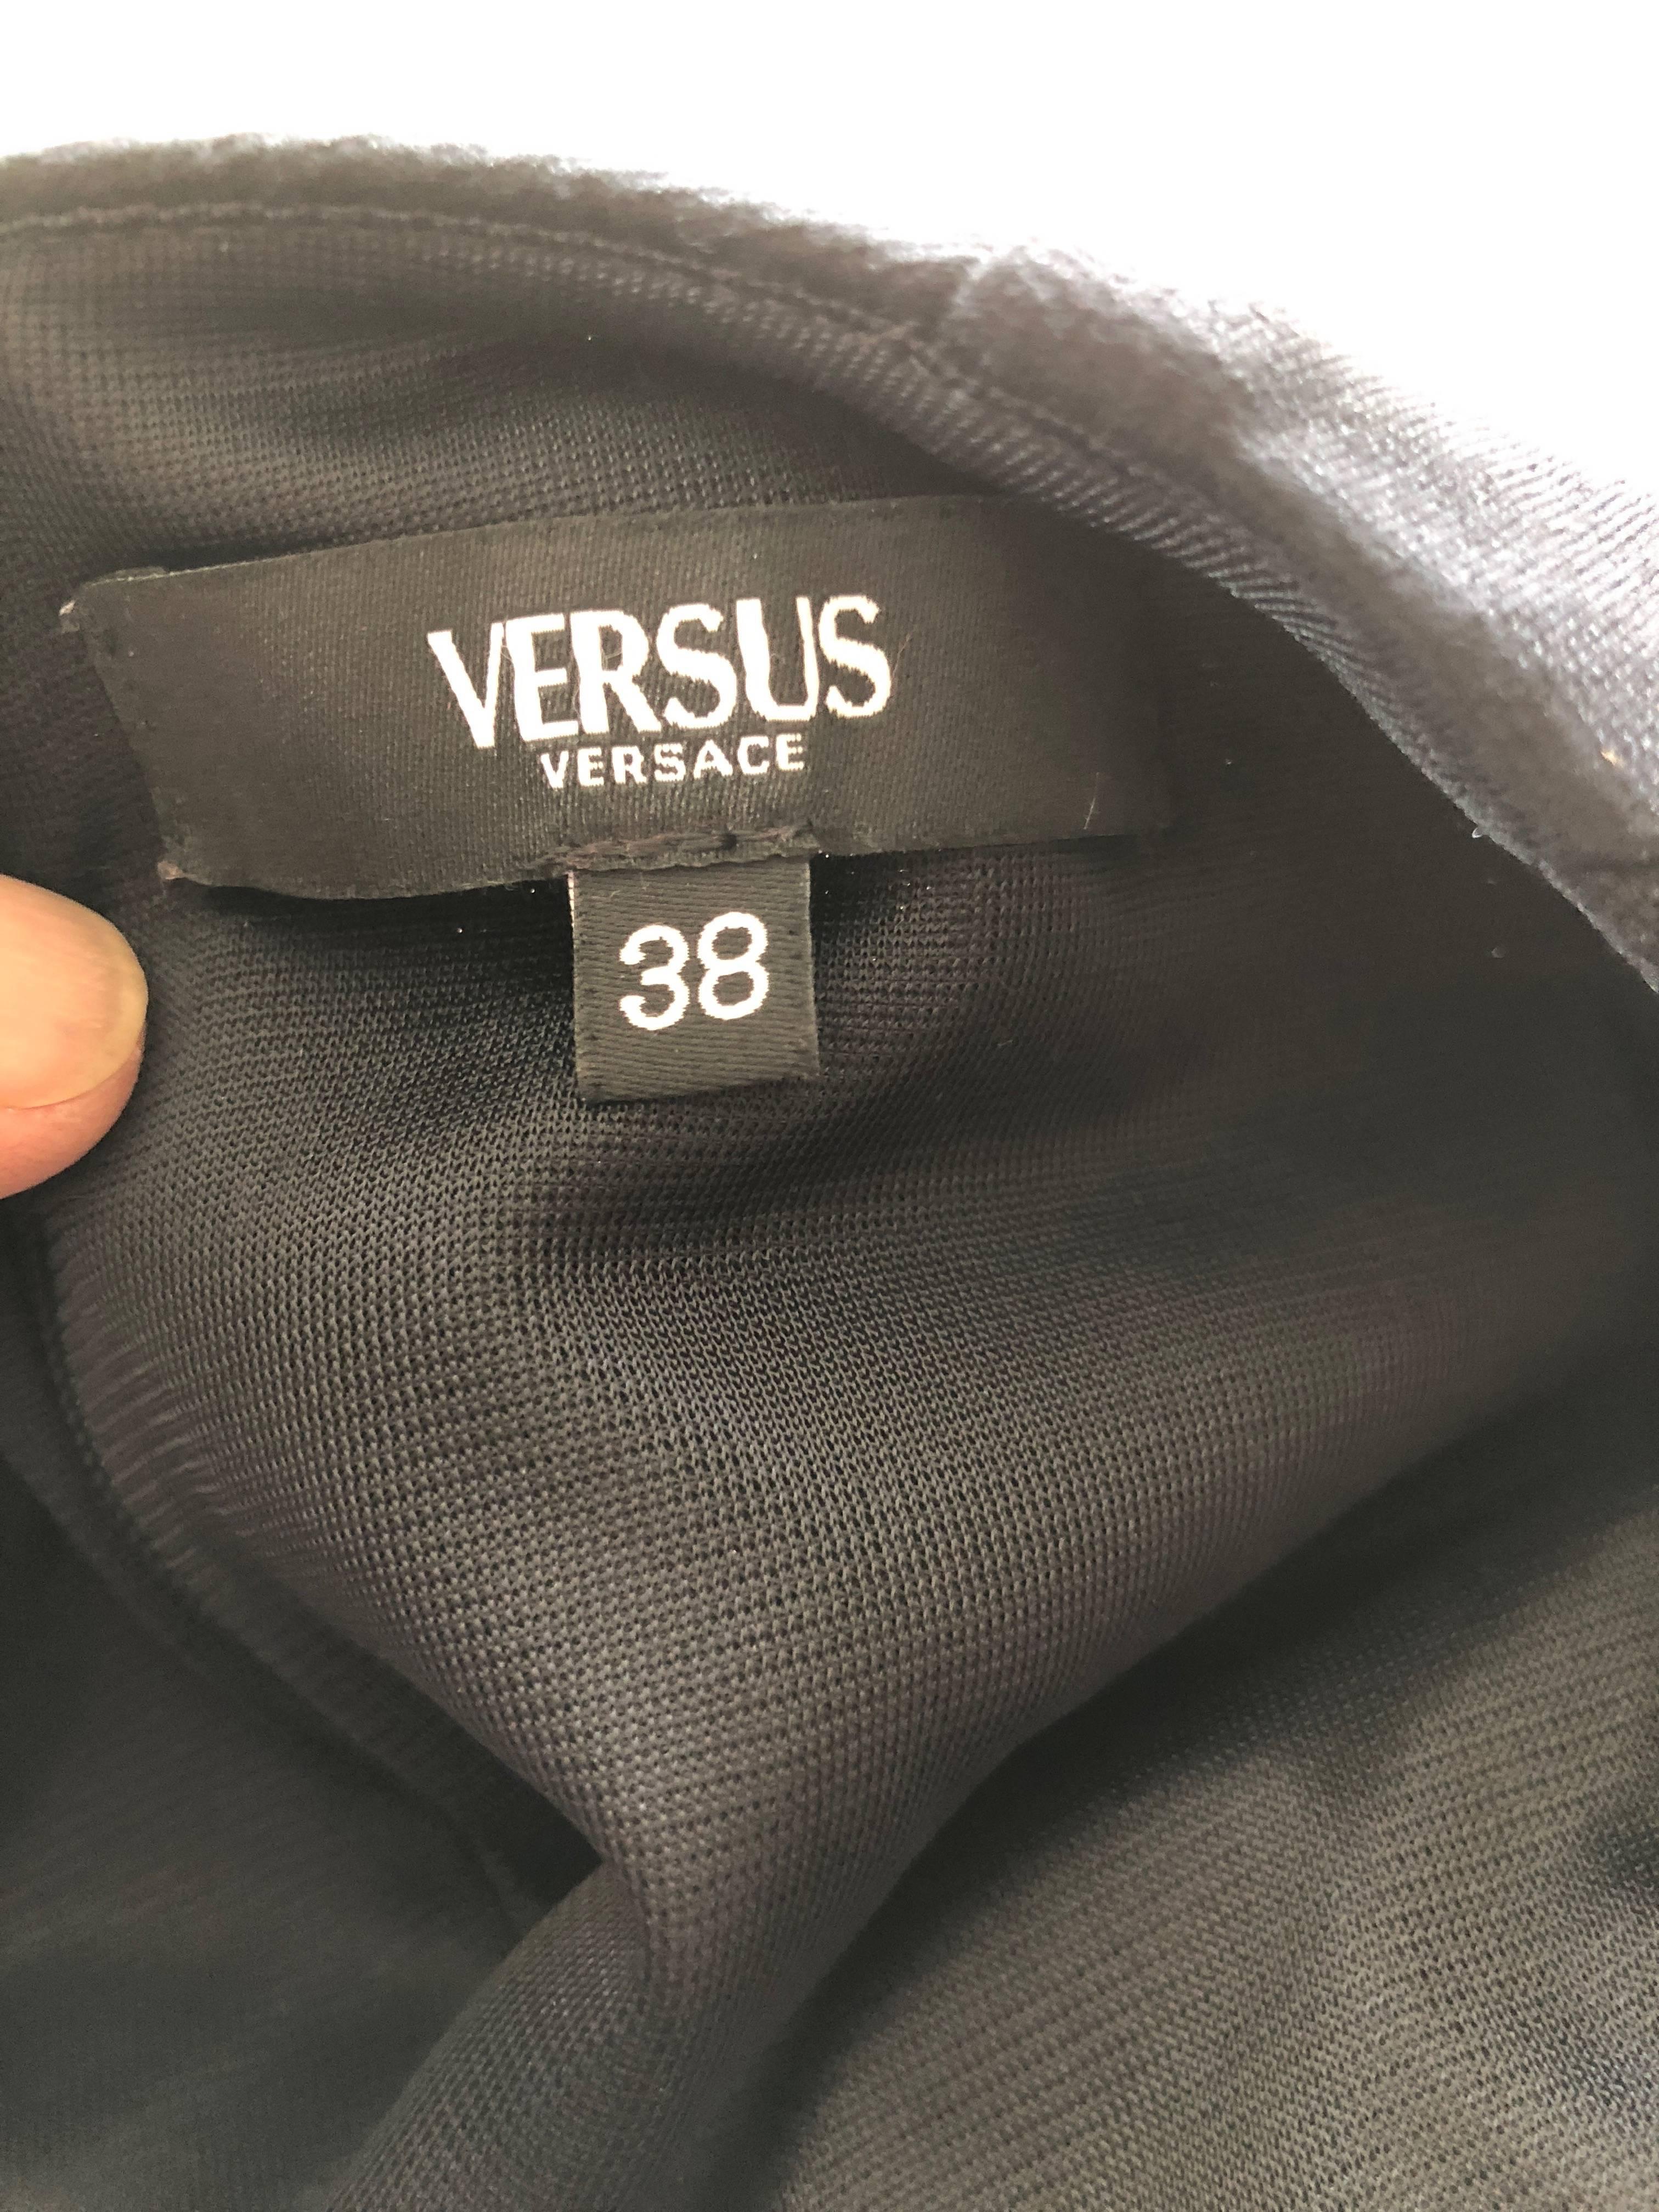  Versus Gianni Versace Safety Pin Mini Dress with Cut Outs For Sale 3